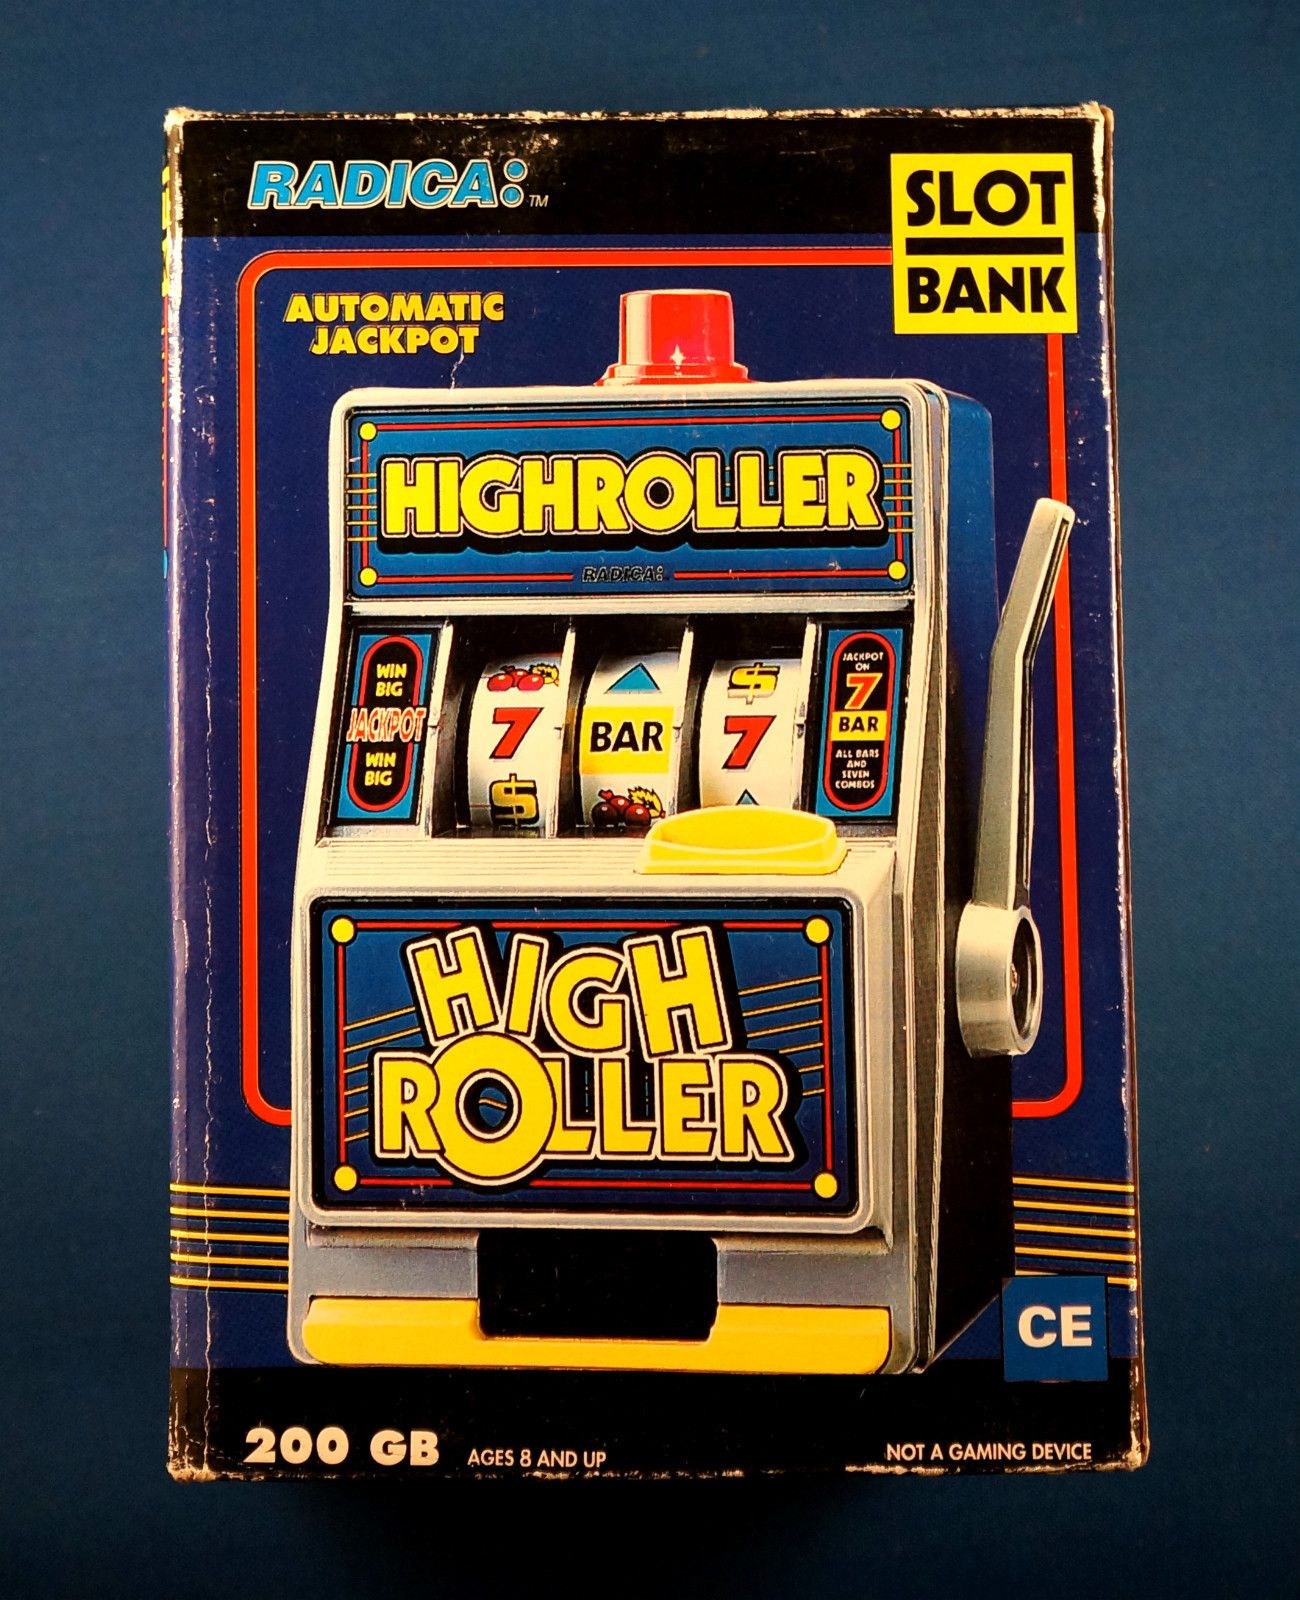  HIGH ROLLER SLOT MACHINE BANK COINS CASINO JACKPOT ELECTRONIC TOY KIDS